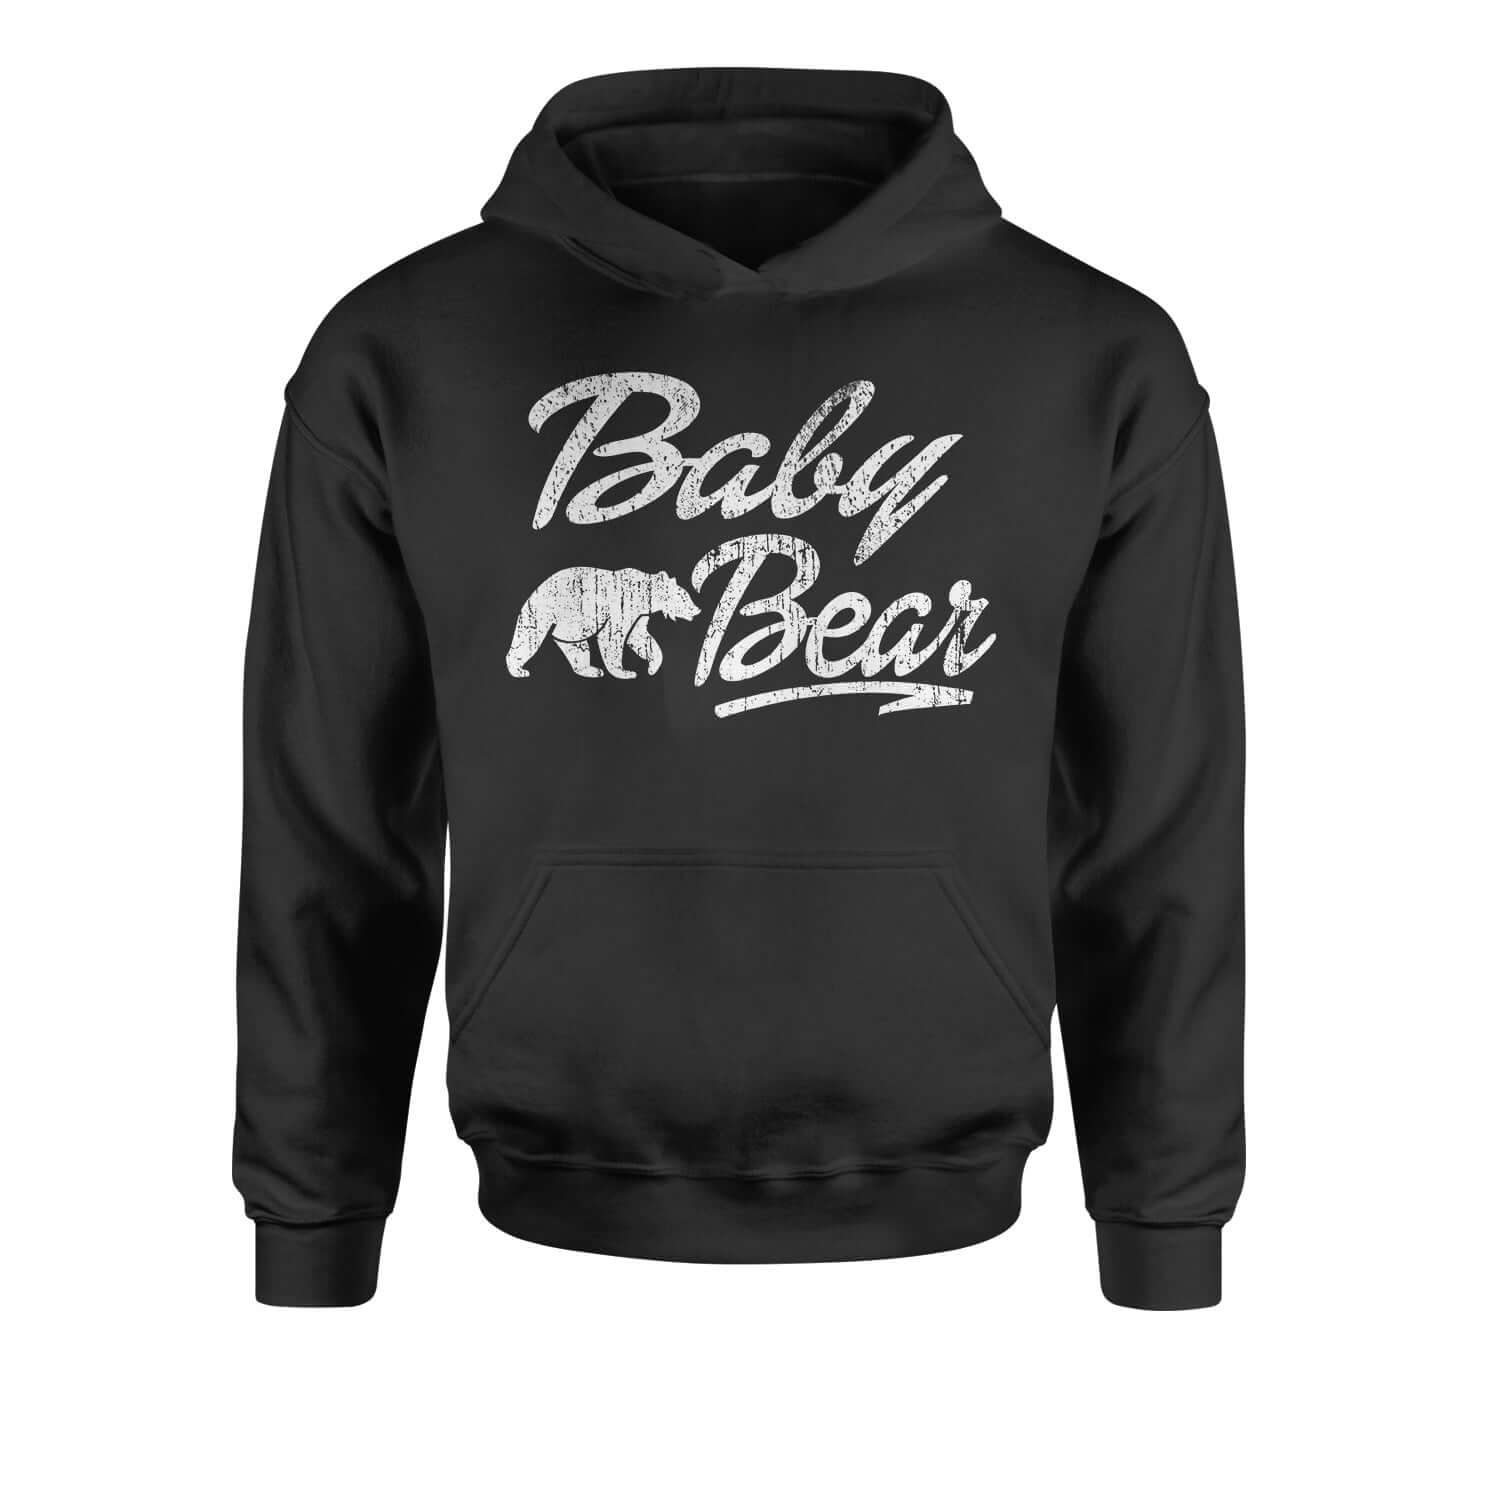 Baby Bear Cub Youth-Sized Hoodie bear, cub, family, matching, shirts, tribe by Expression Tees